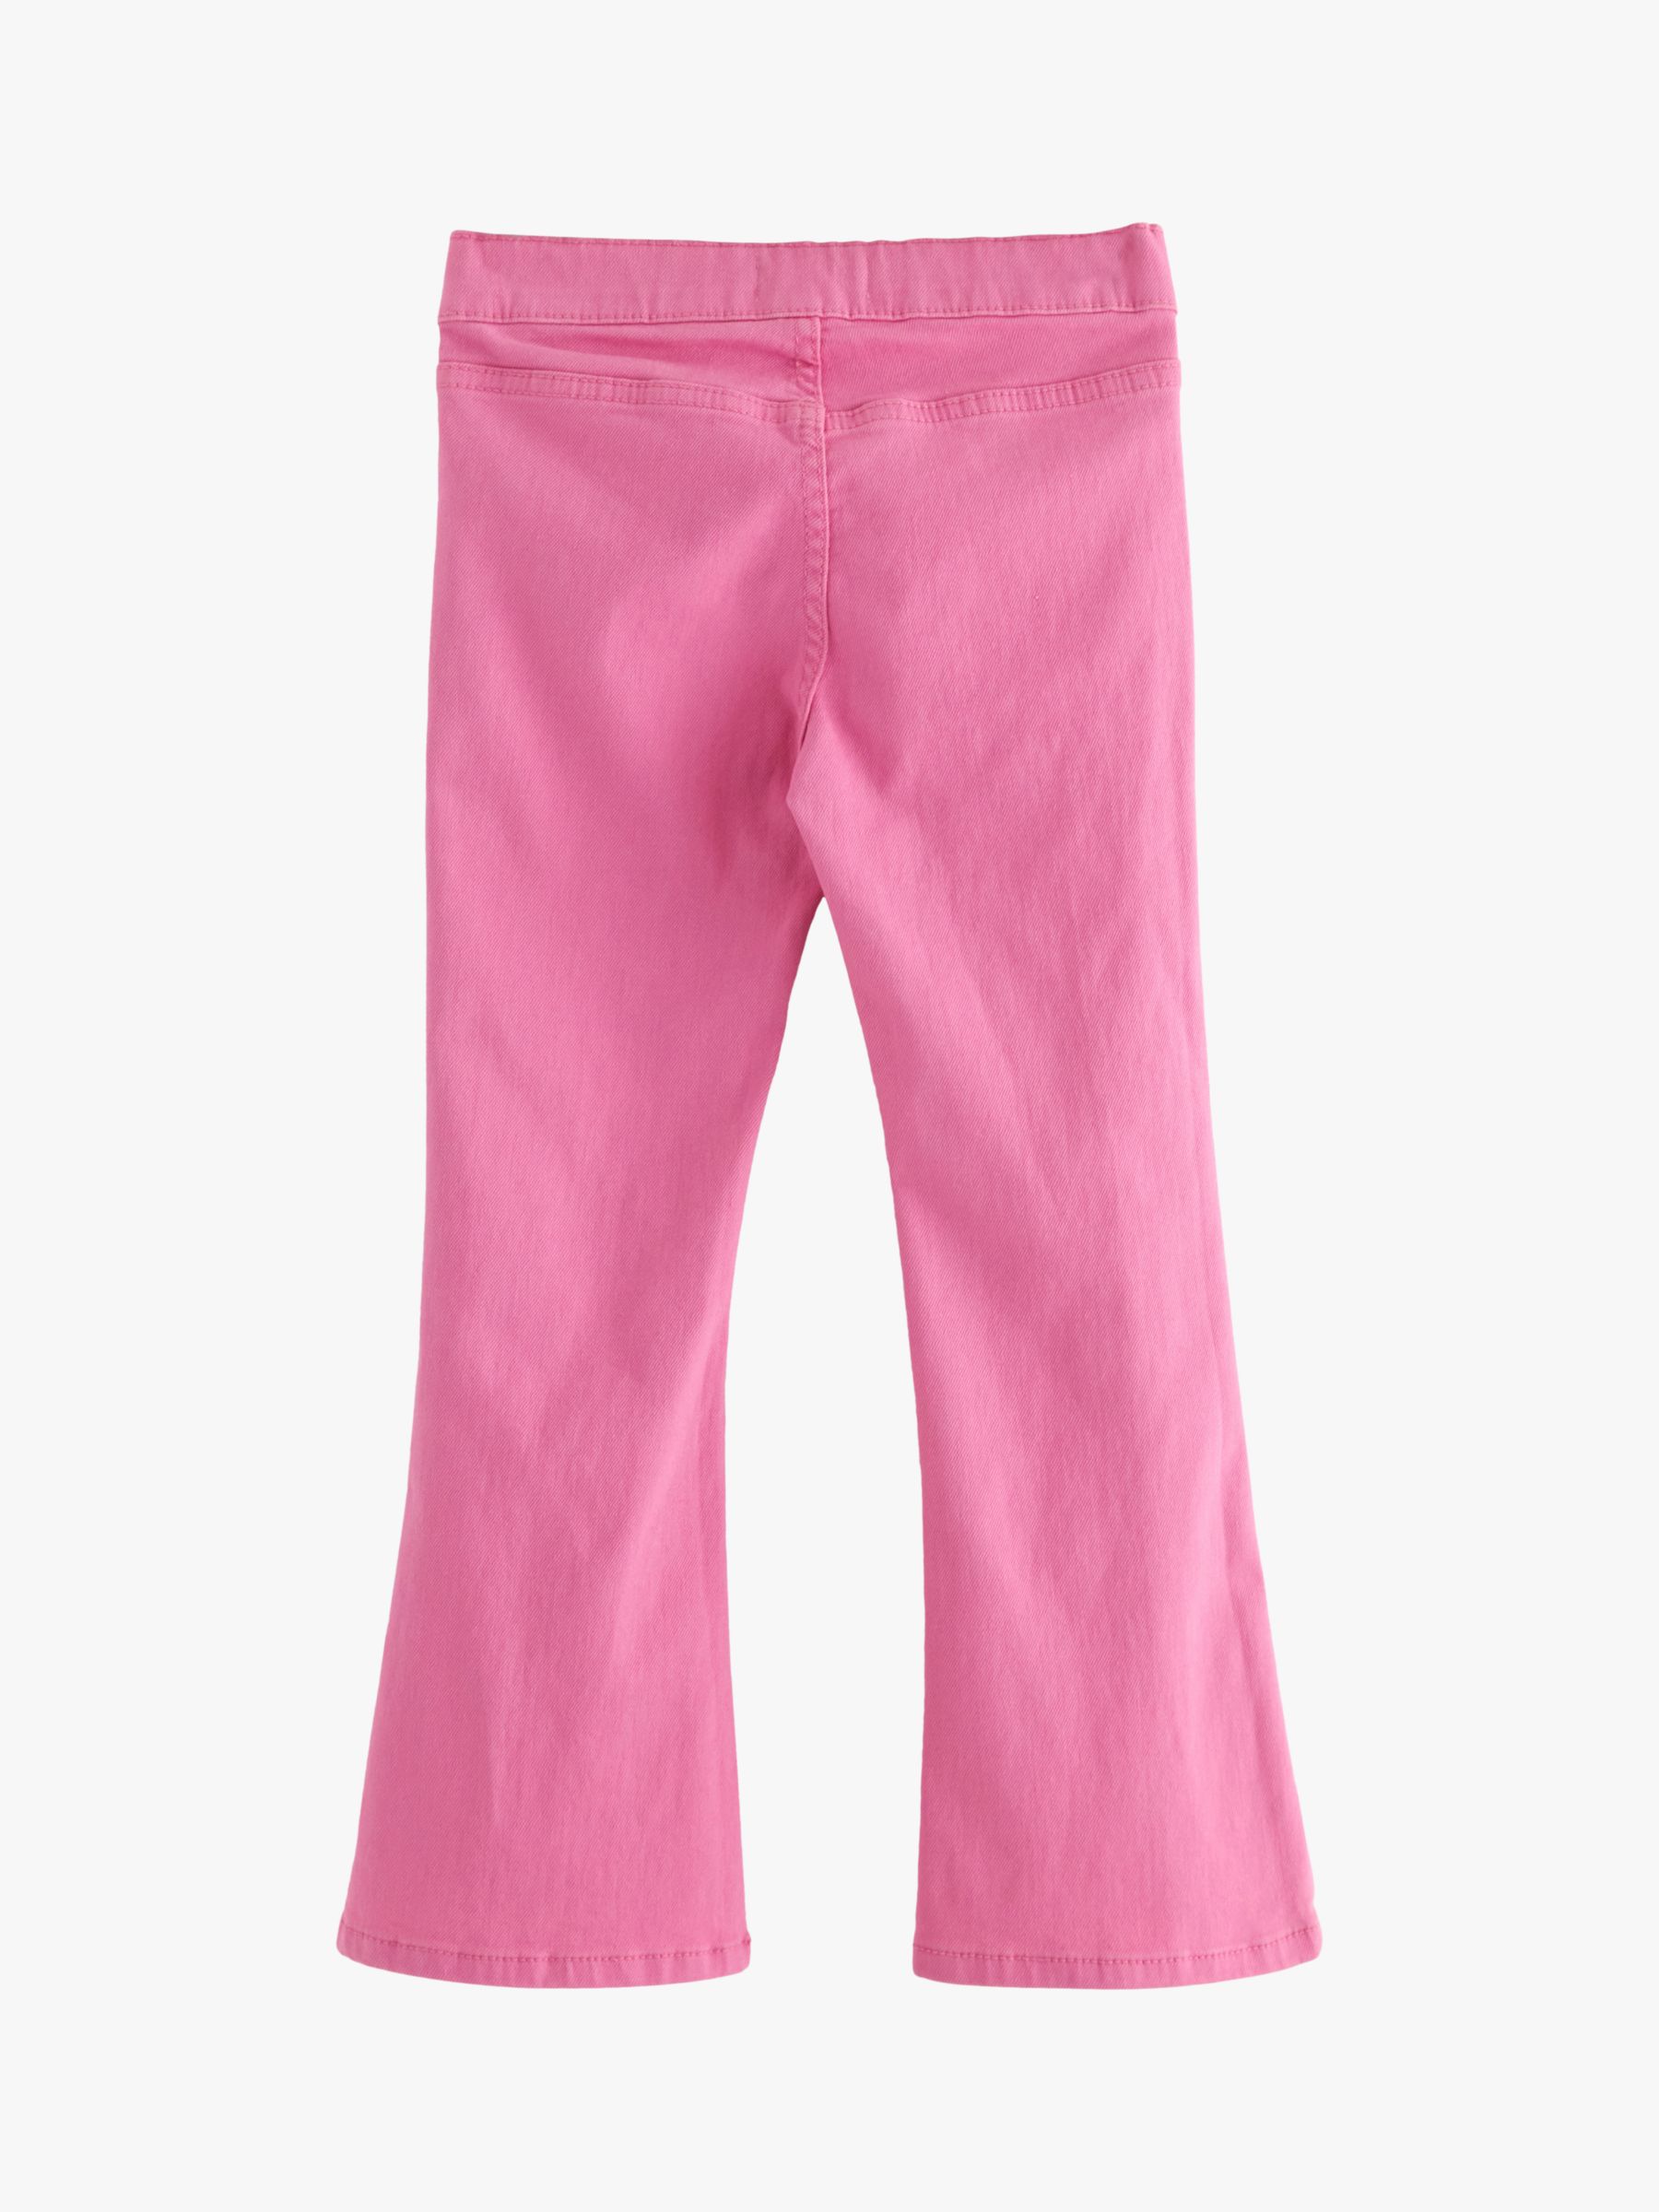 Buy Lindex Kids' Twill Stretch Fit Flared Trousers, Pink Online at johnlewis.com